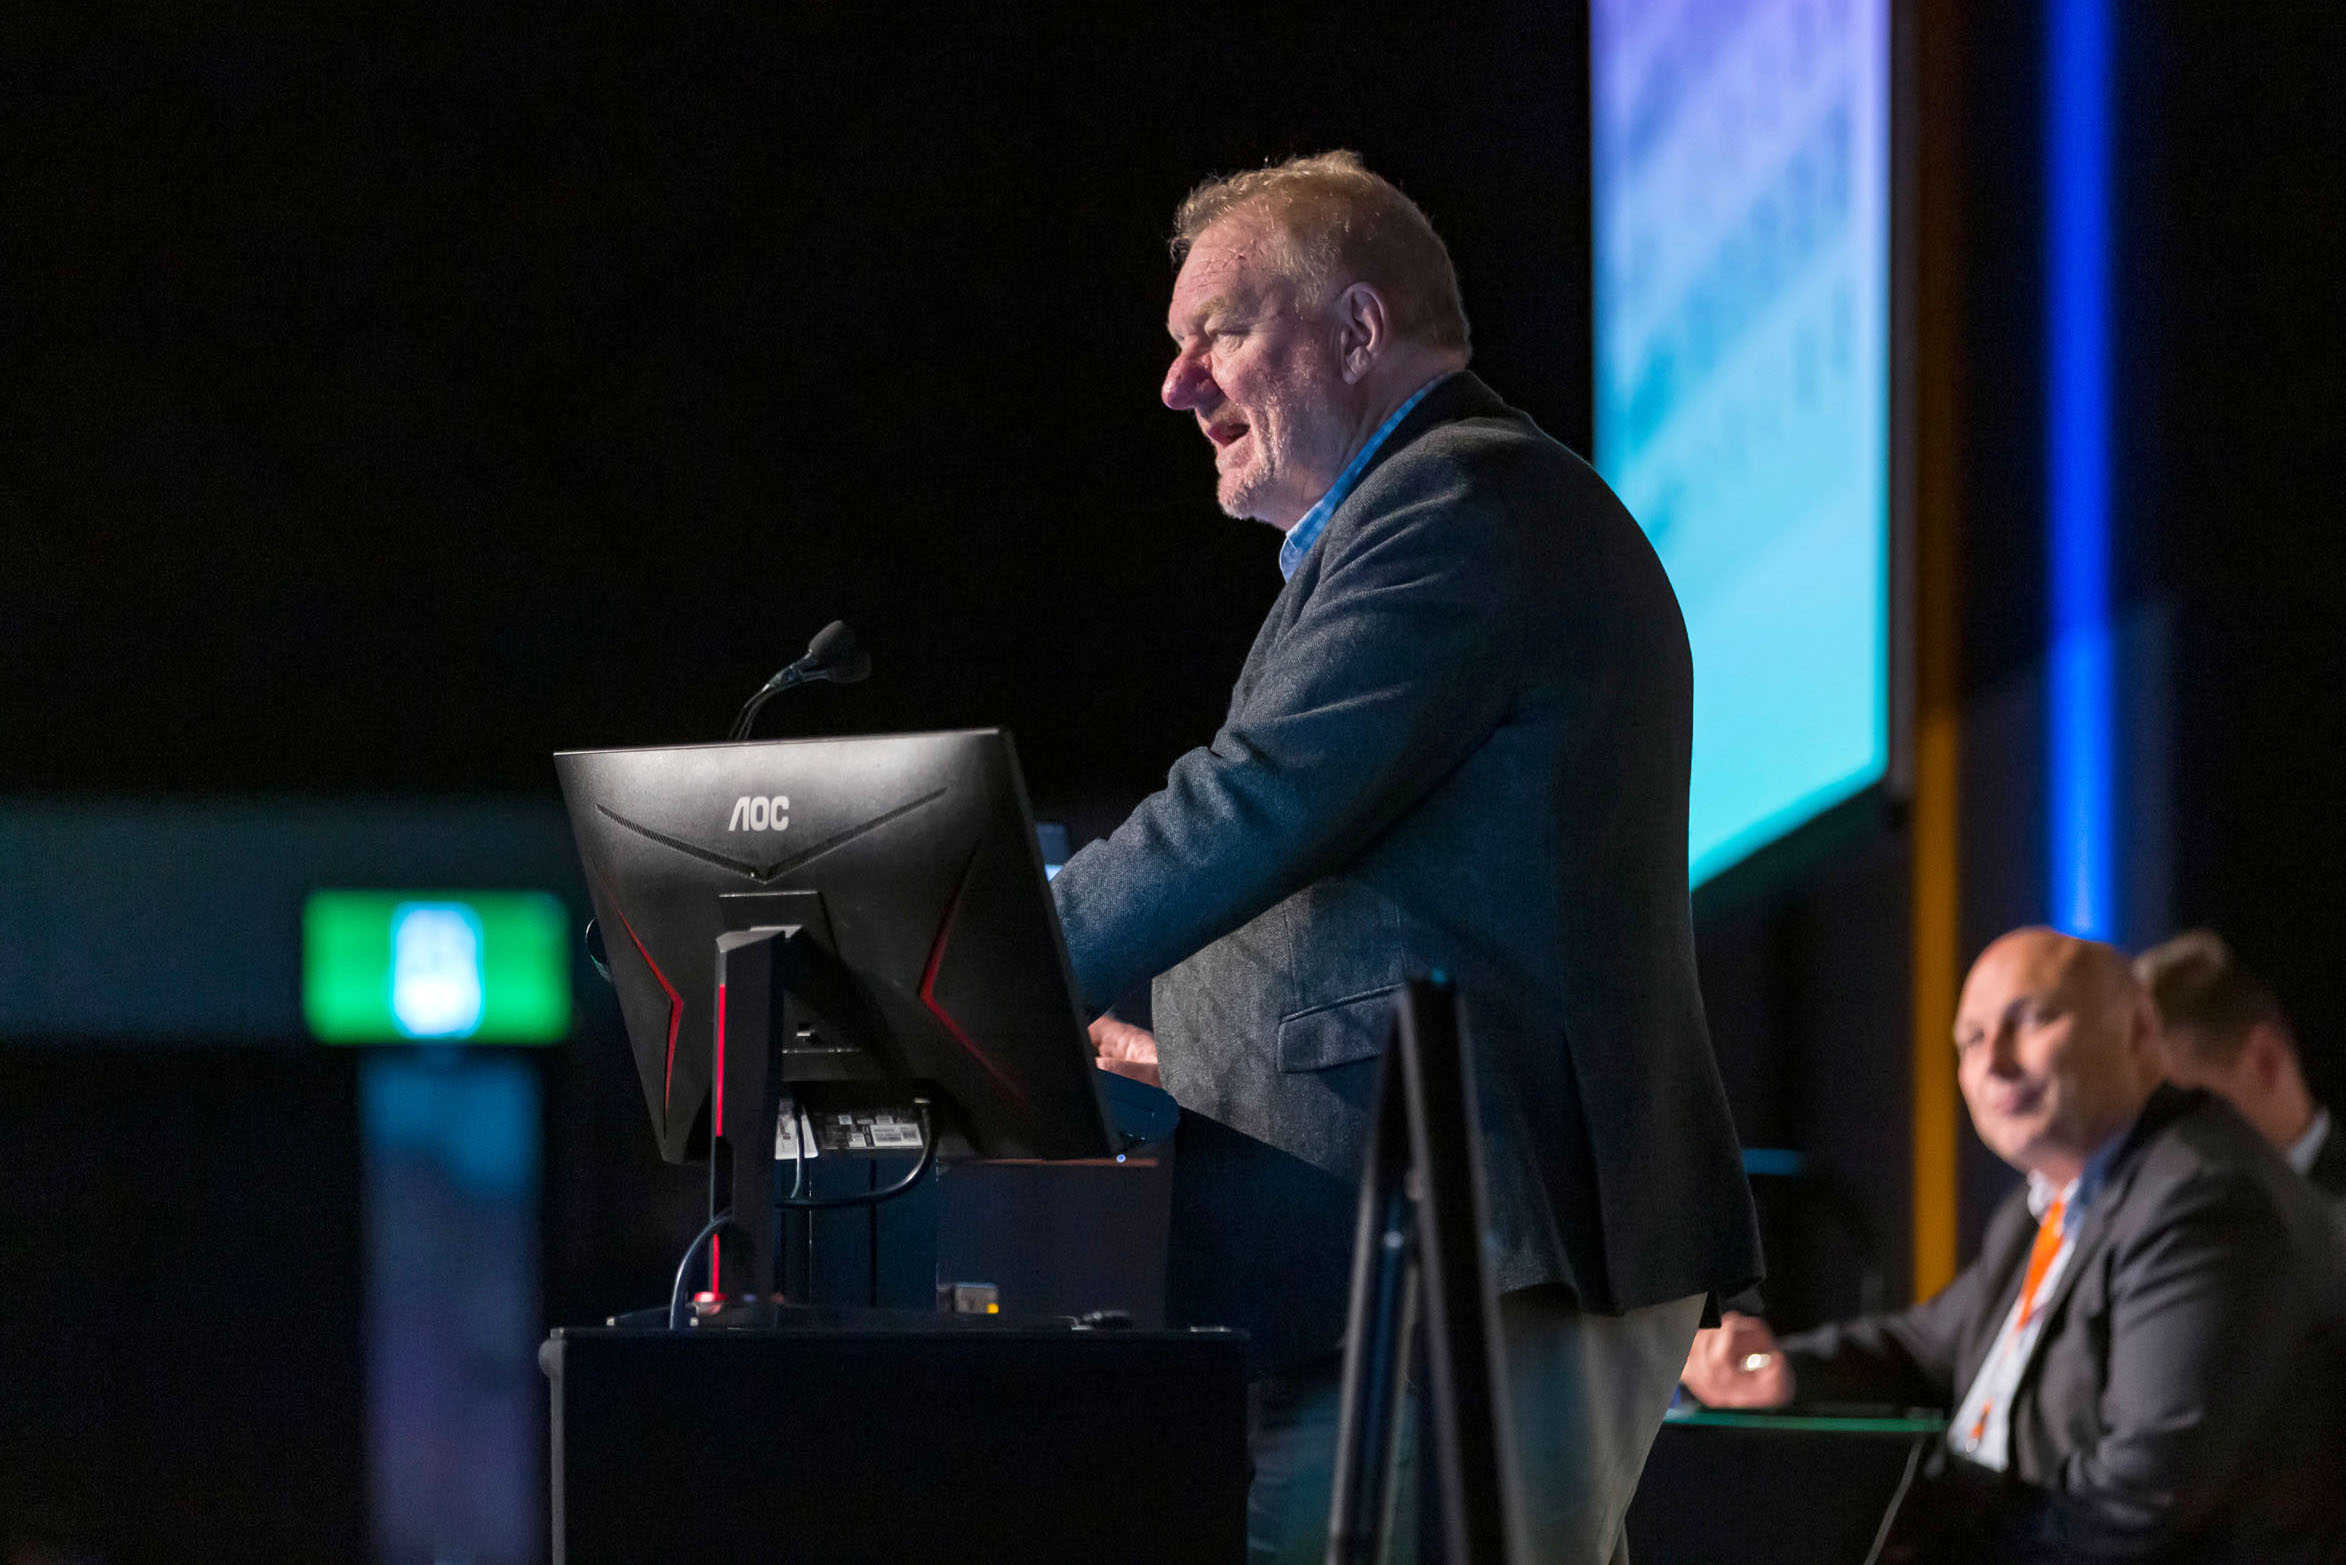 Keynote speaker during conference presentation on stage, Te Pae, Christchurch.